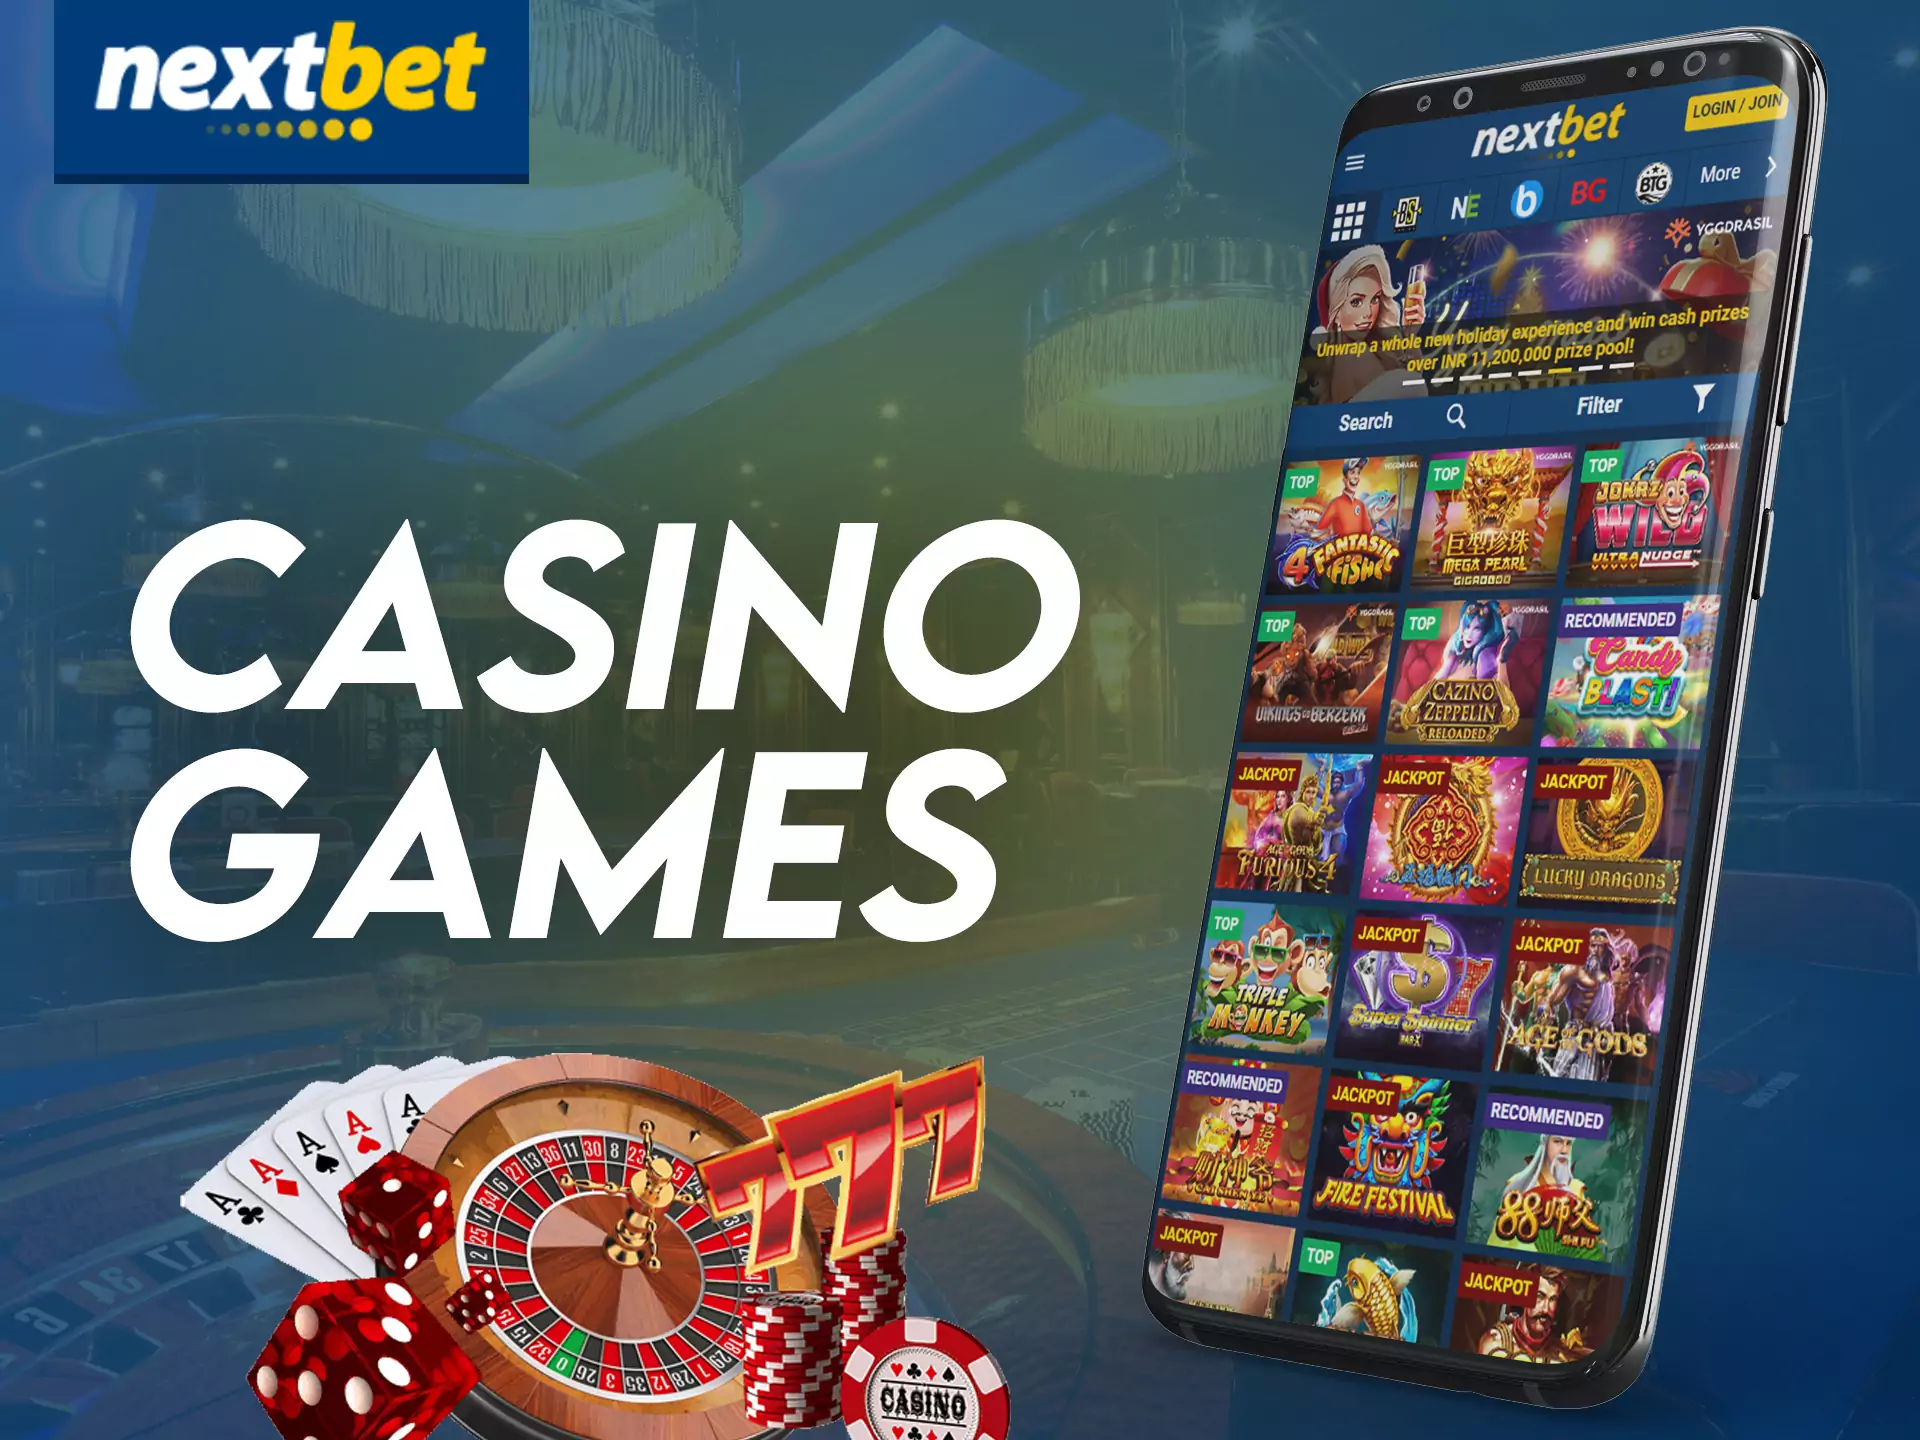 Try to play various casino games in the Nextbet app.